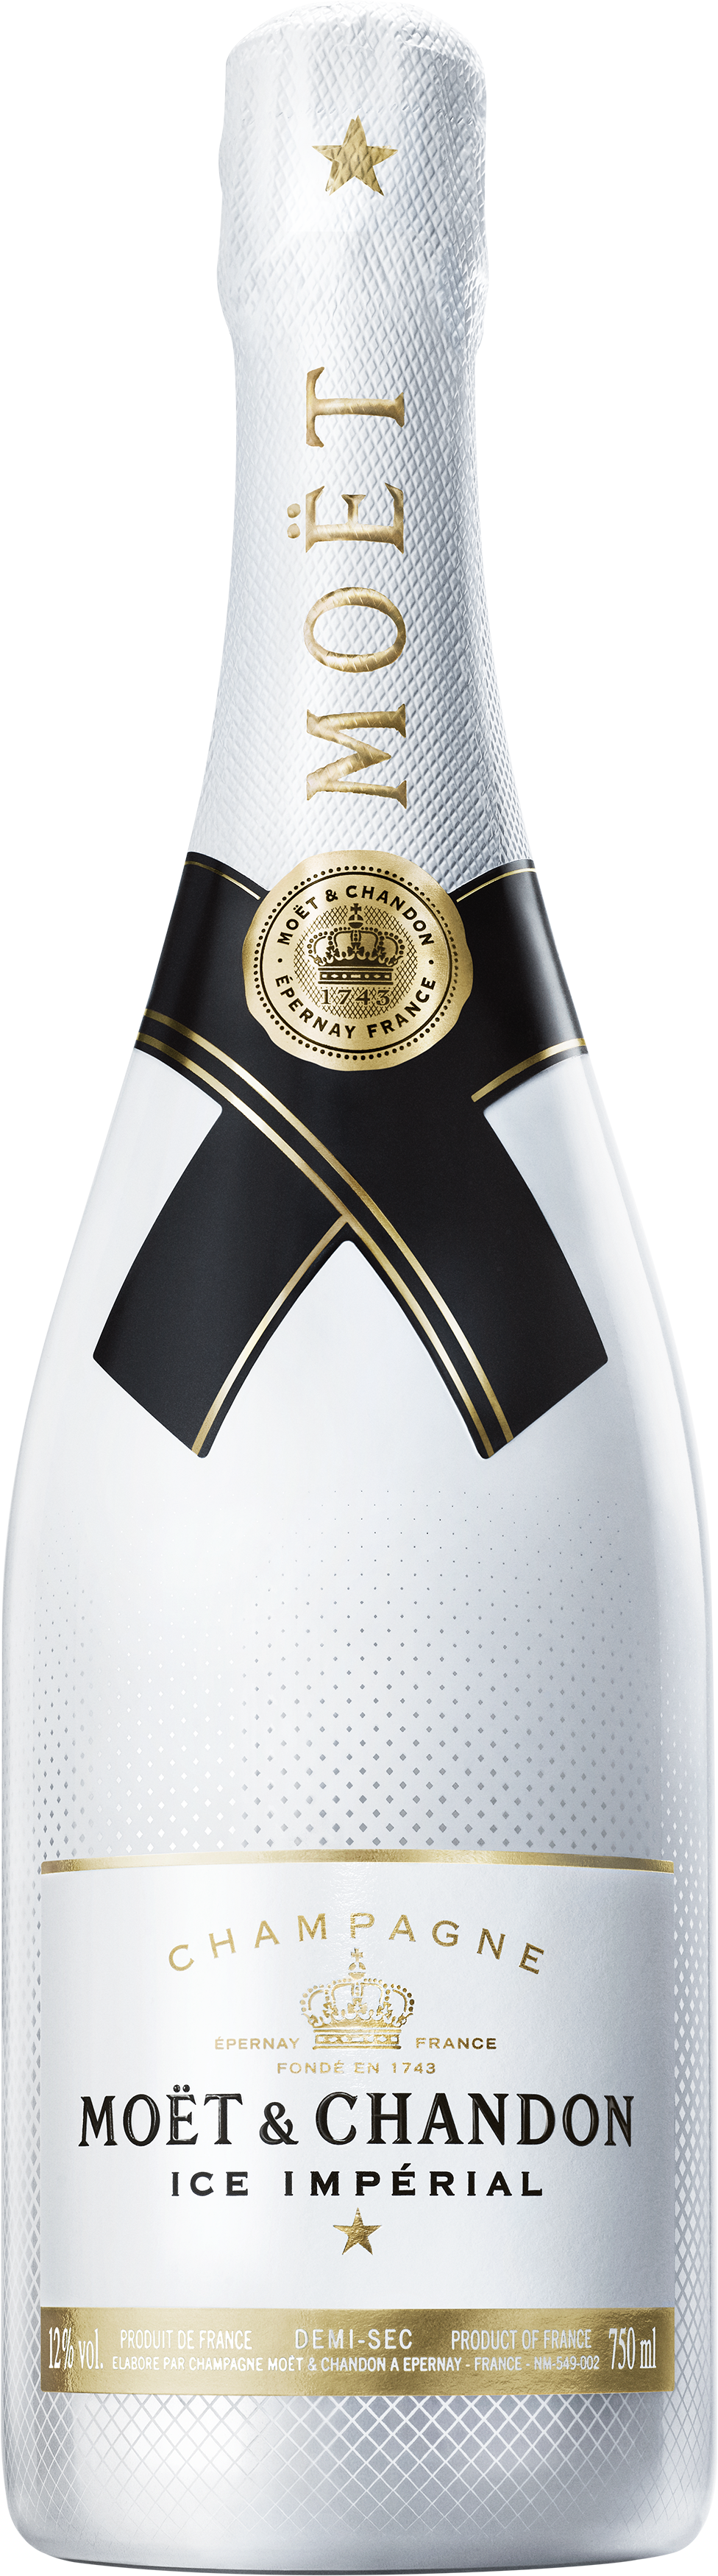 Moet & Chandon Ice Imperial Champagne 750ML – Wine Delight